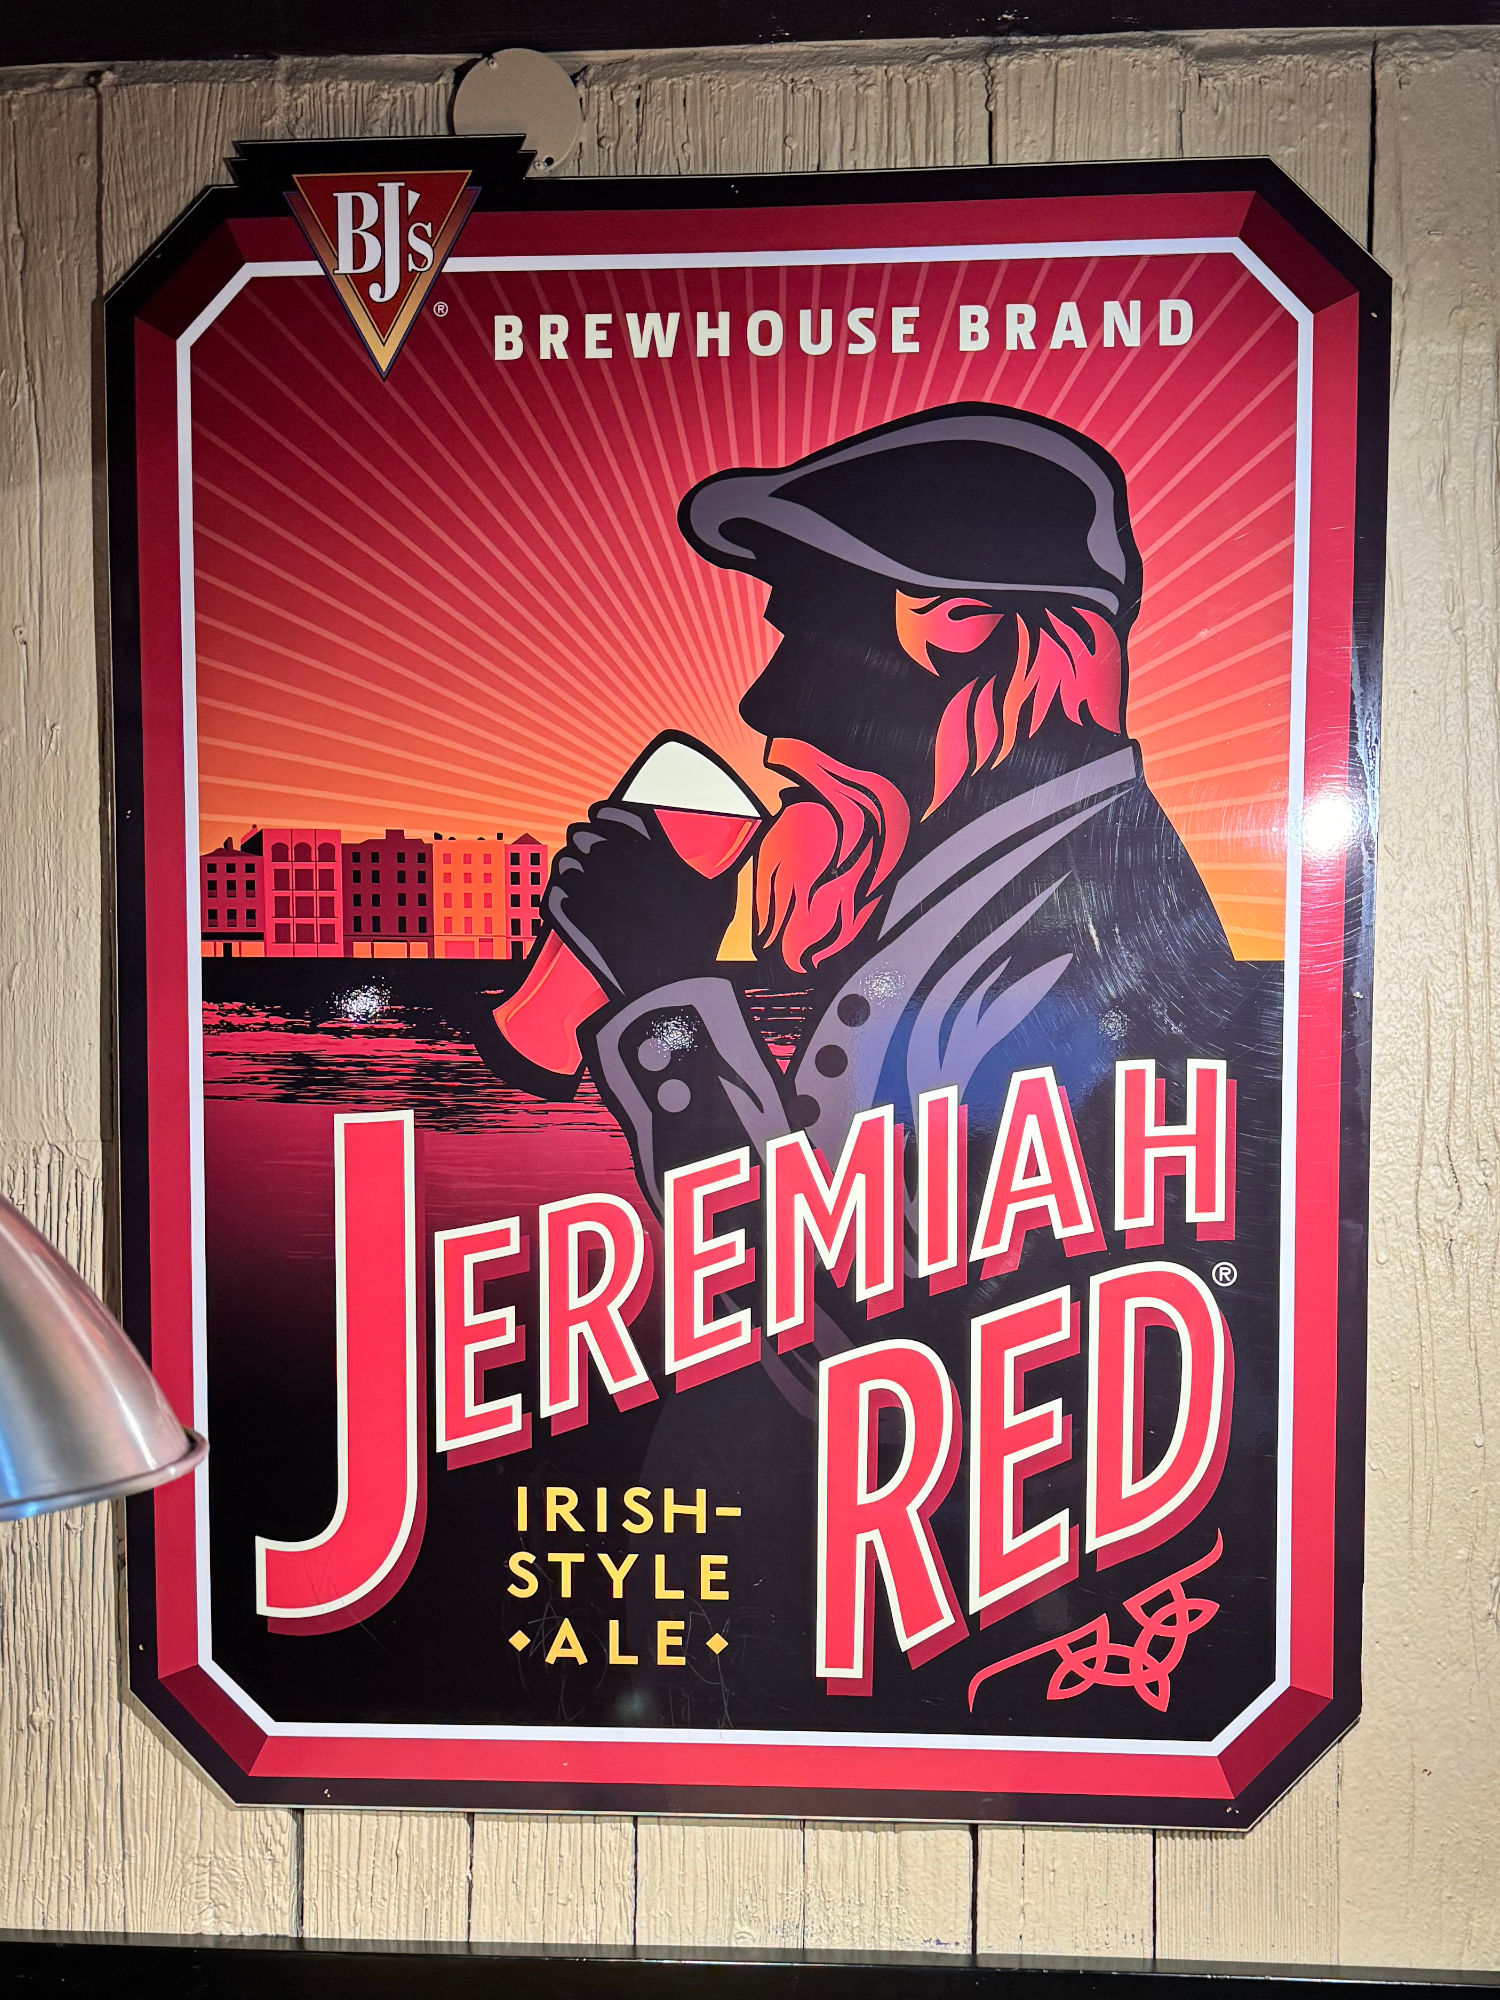 Bj's Brewhouse Jeremiah Red